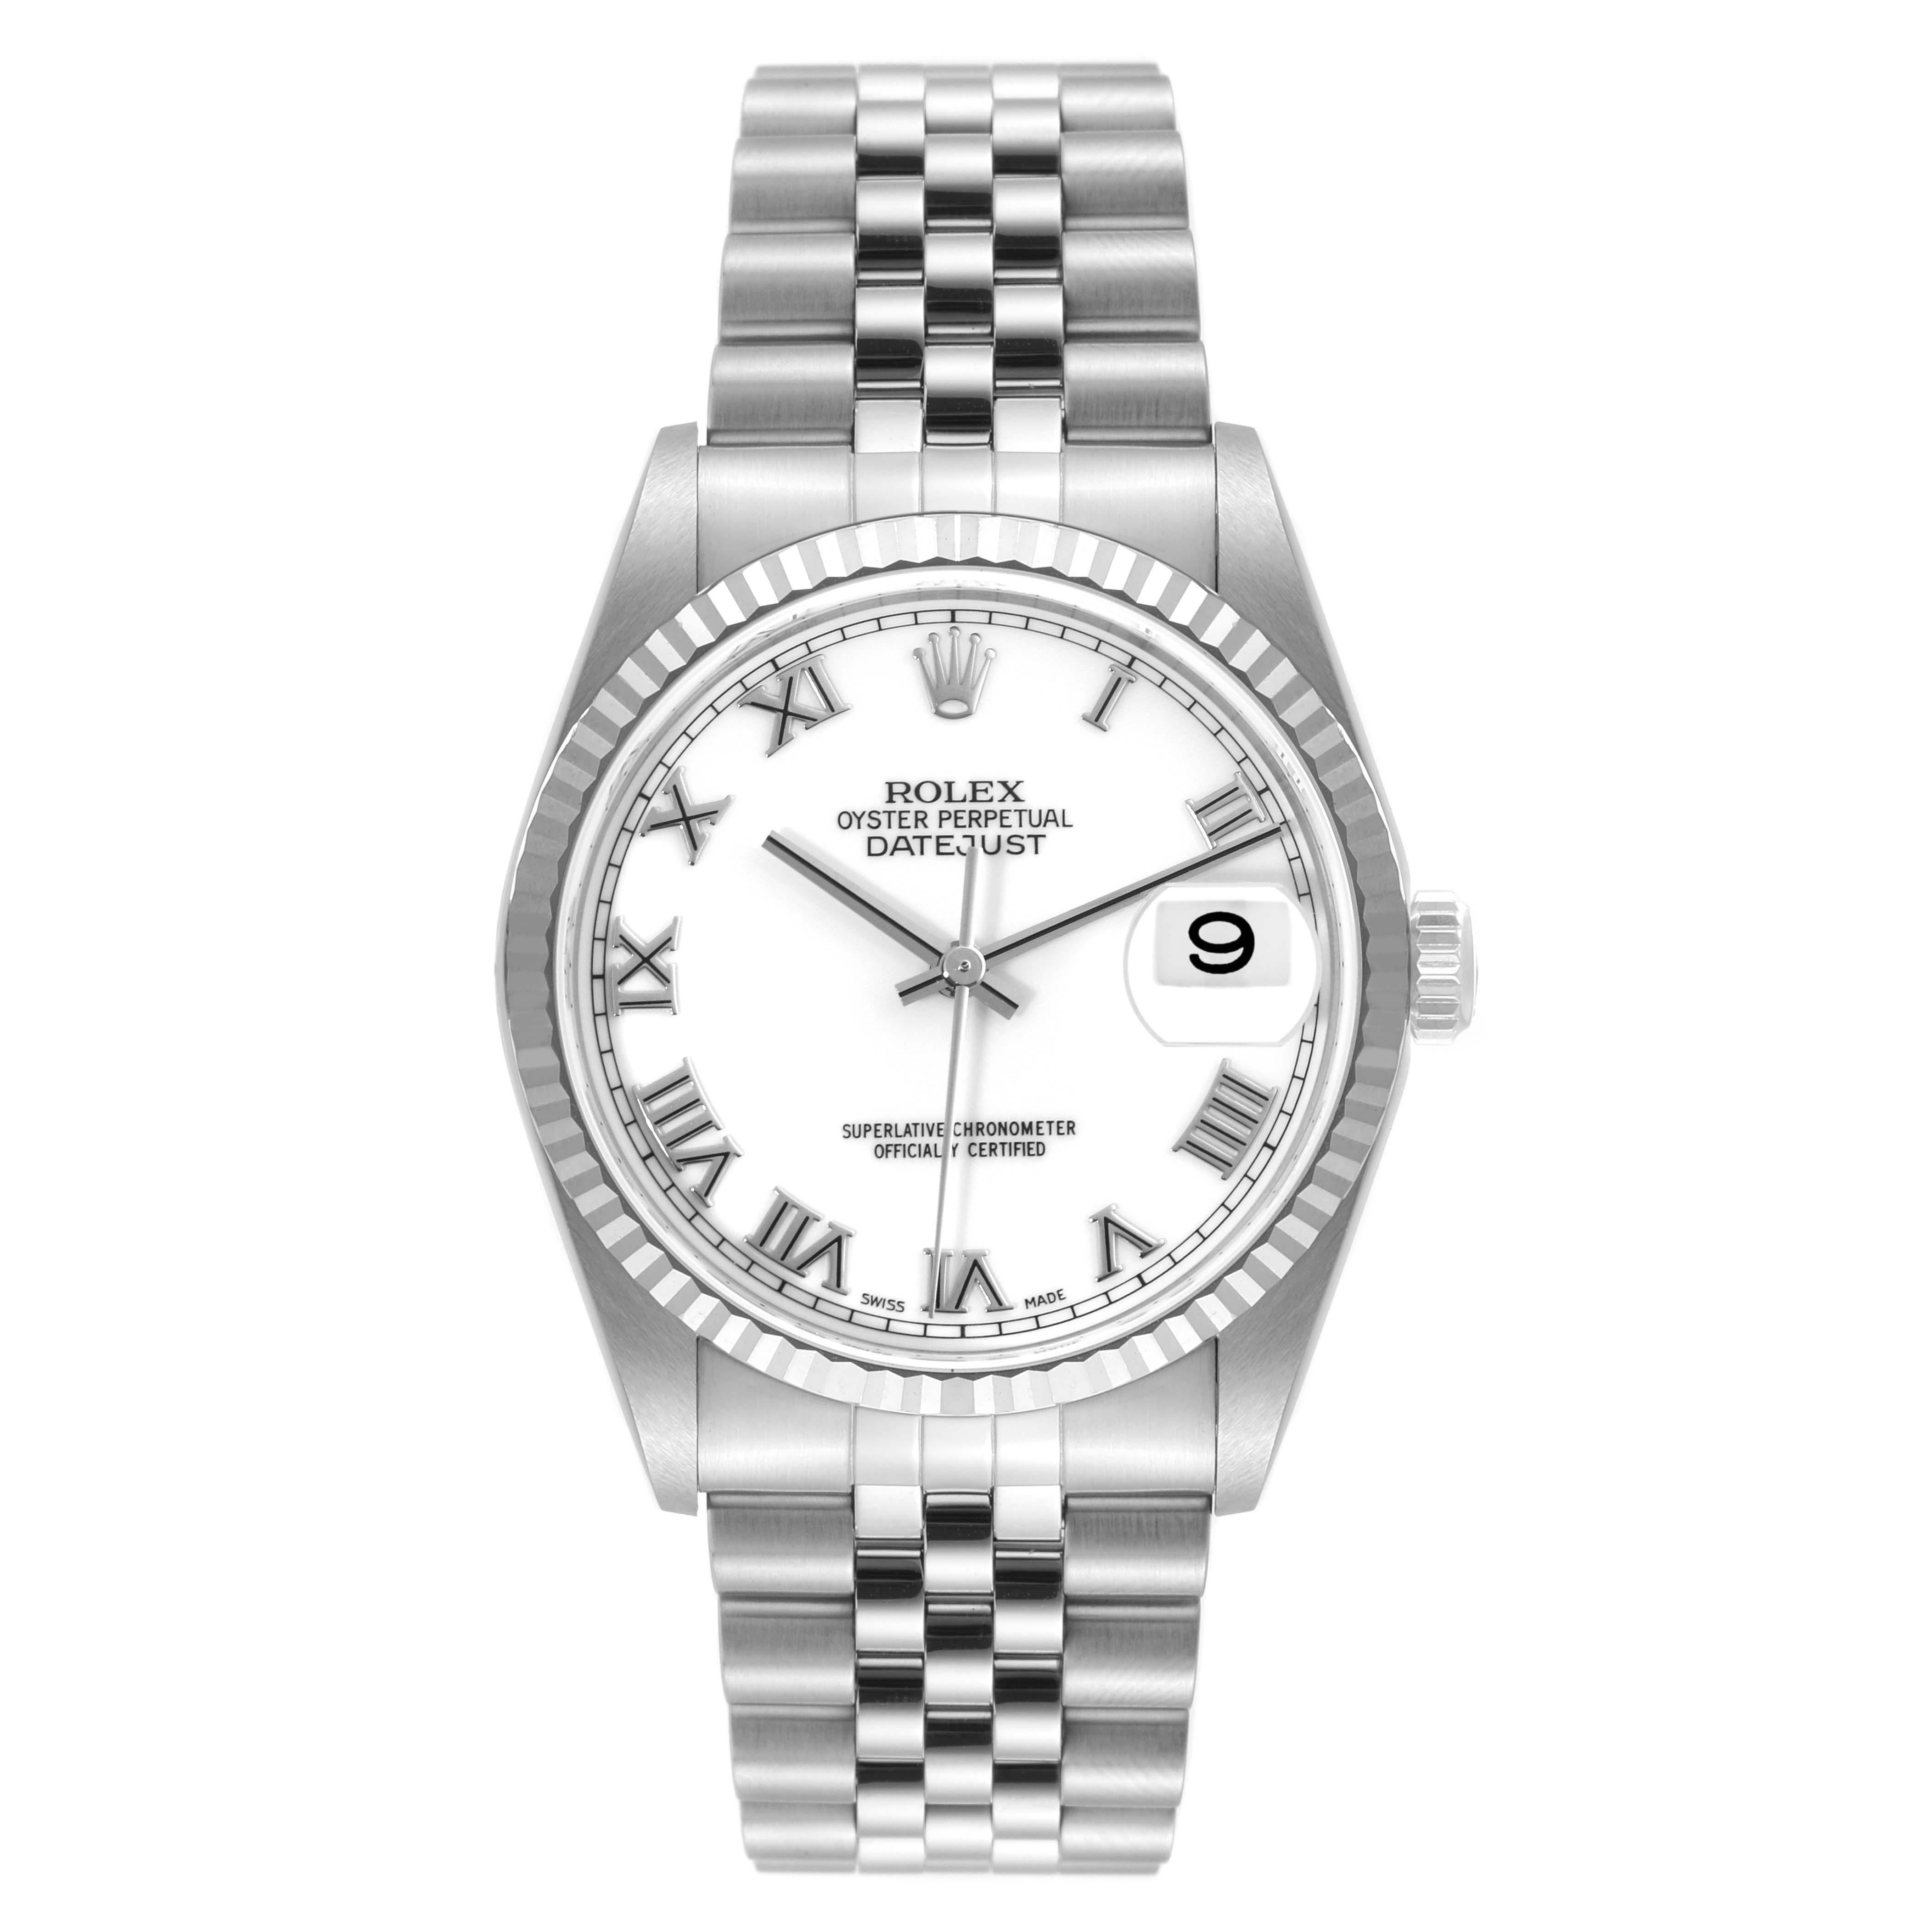 Rolex Datejust Roman Dial Steel White Gold Mens Watch 16234. Officially certified chronometer automatic self-winding movement. Stainless steel oyster case 36 mm in diameter. Rolex logo on the crown. 18k white gold fluted bezel. Scratch resistant